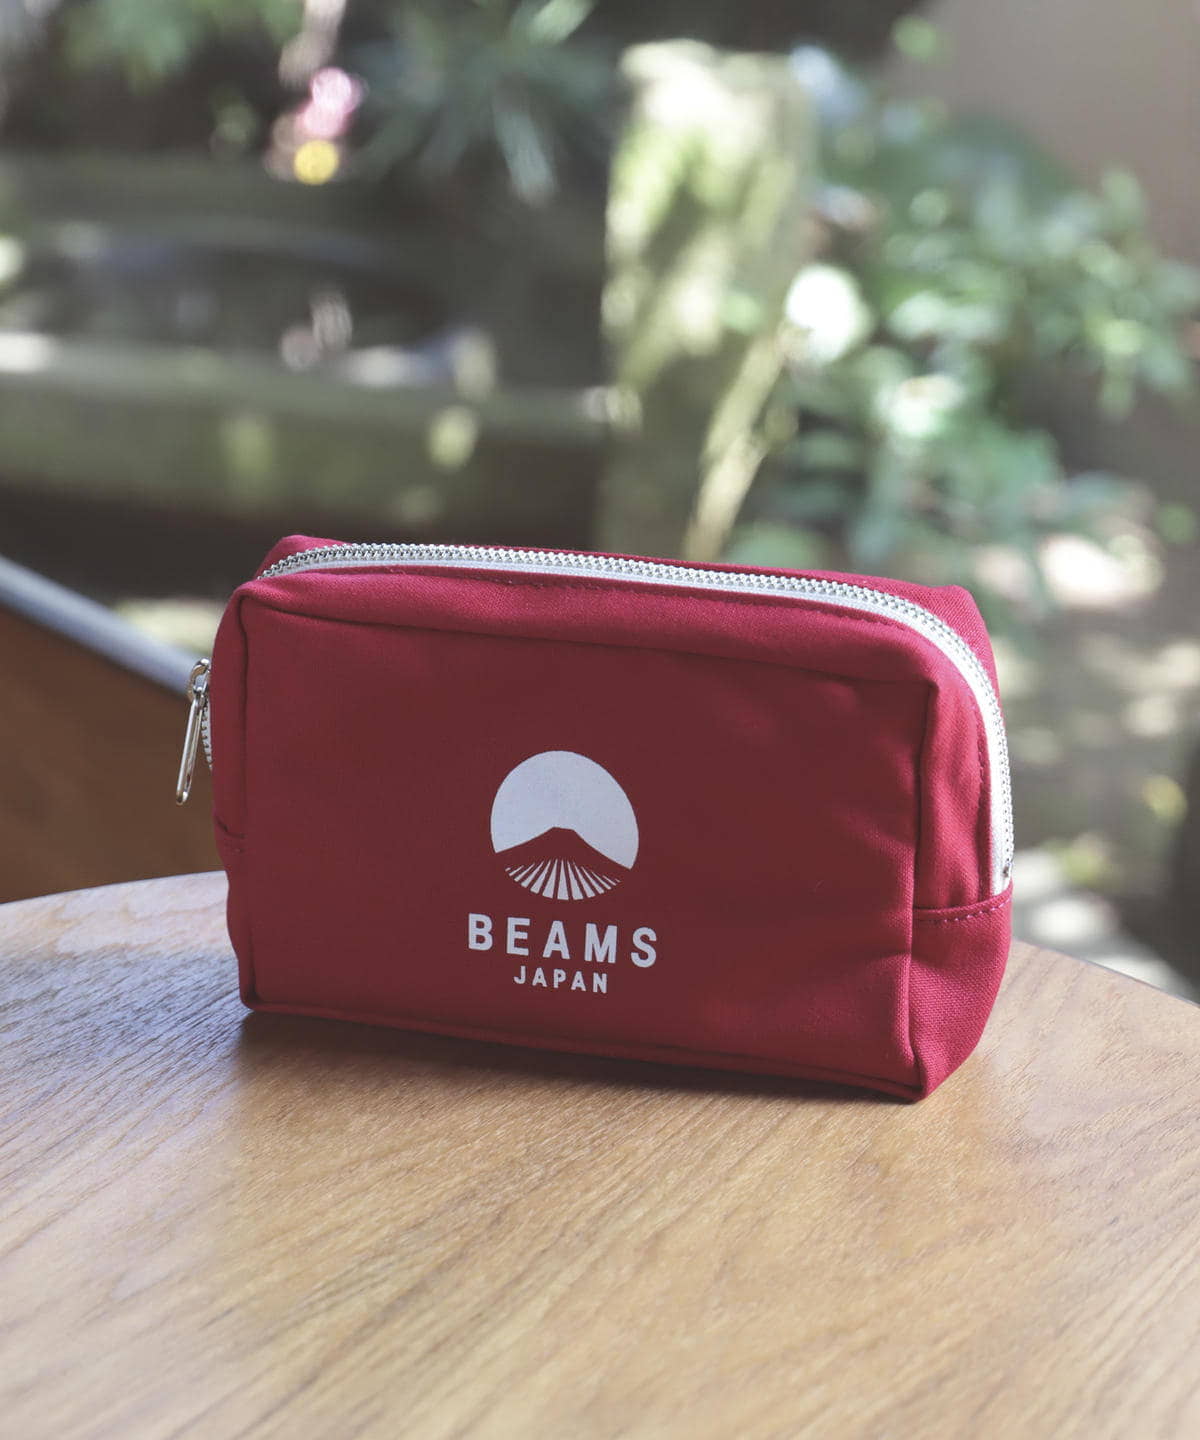 evergreen works × BEAMS JAPAN / Special order logo pouch M